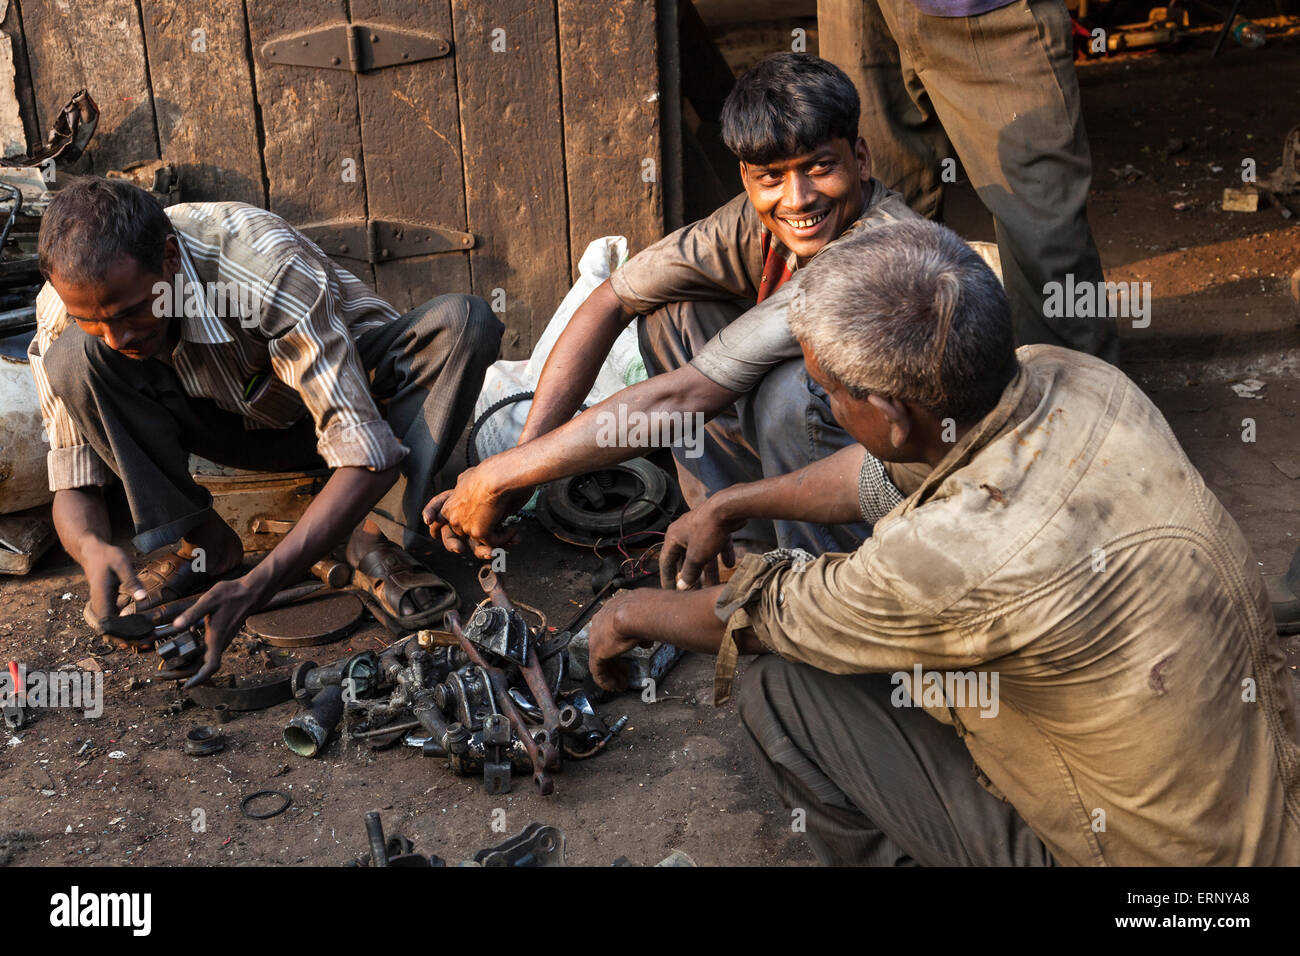 Indian workings sitting together in a market in Mumbai, India Stock Photo